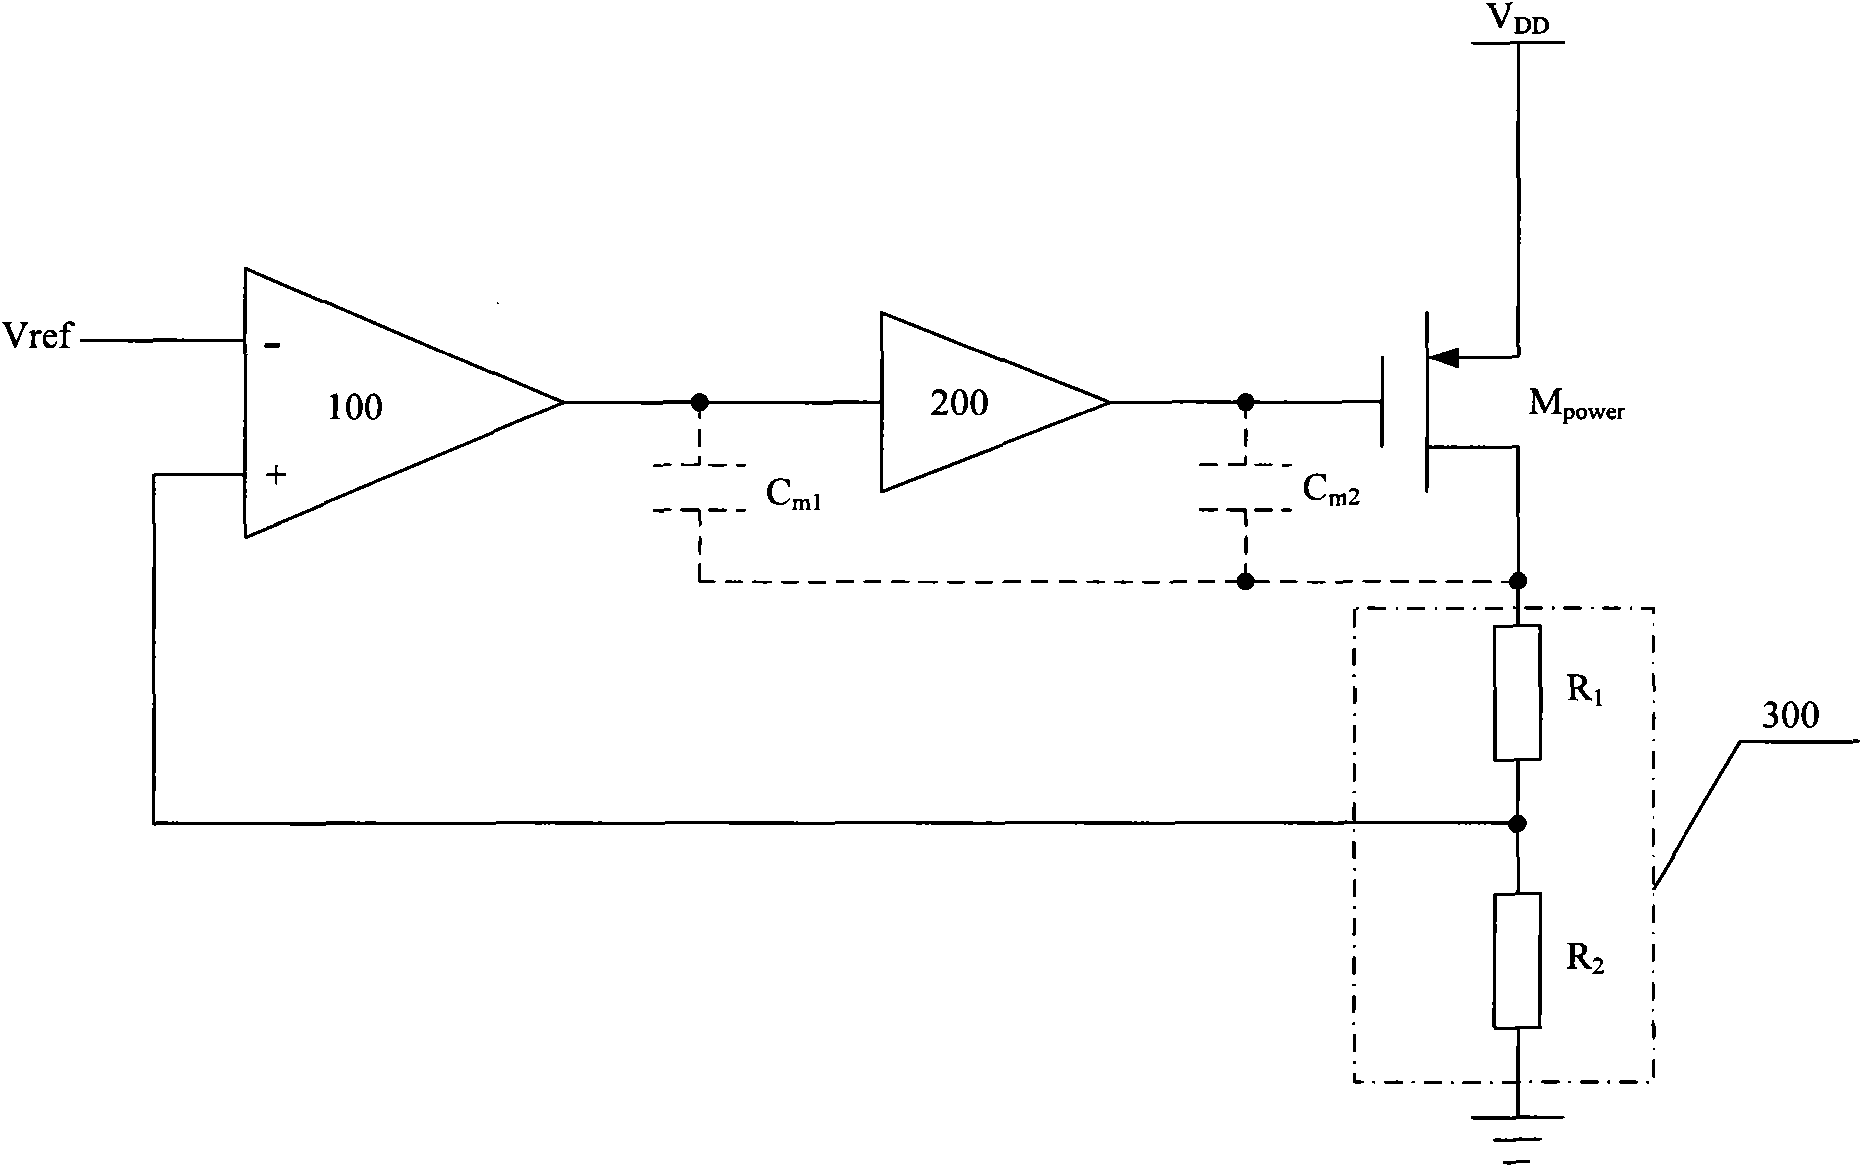 Capacitor-less low dropout regulator structure